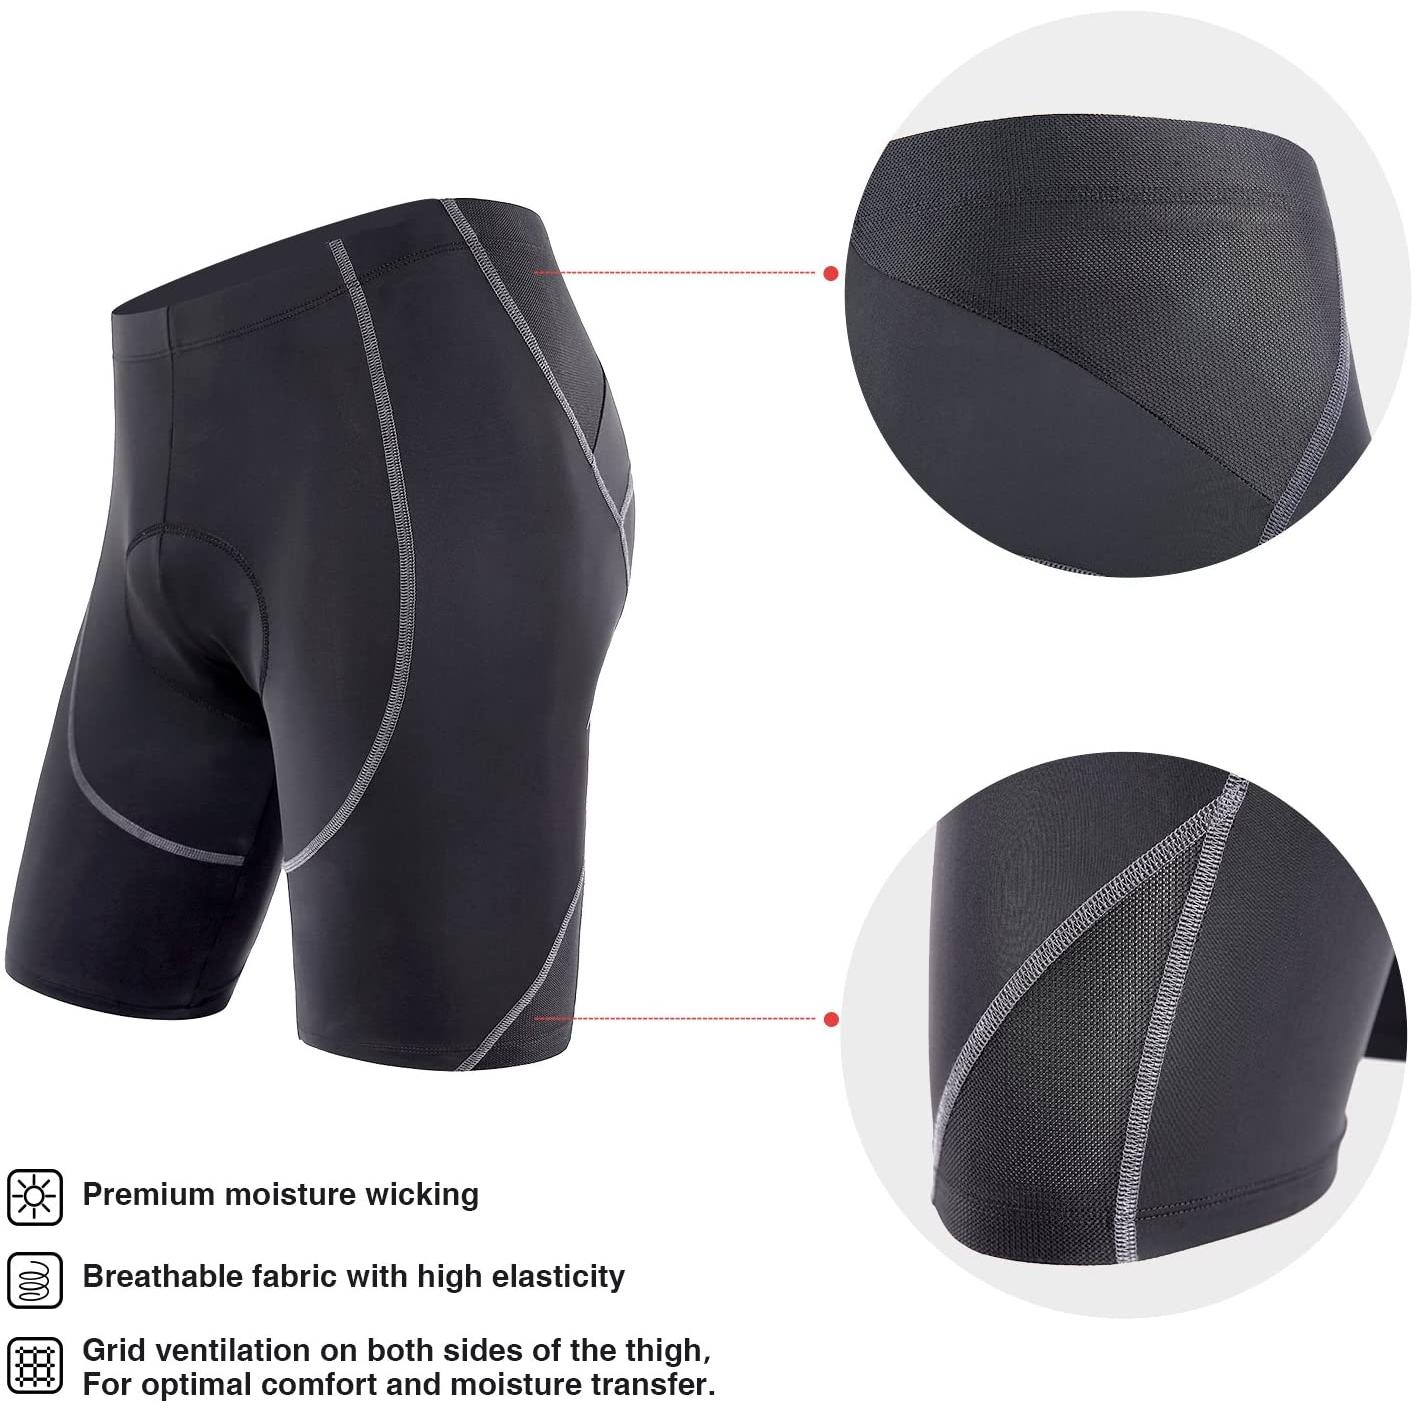 Men Quick DRY Cycling Shorts Bicycle Bike Underwear Pants With Gel 3D Padded  CA